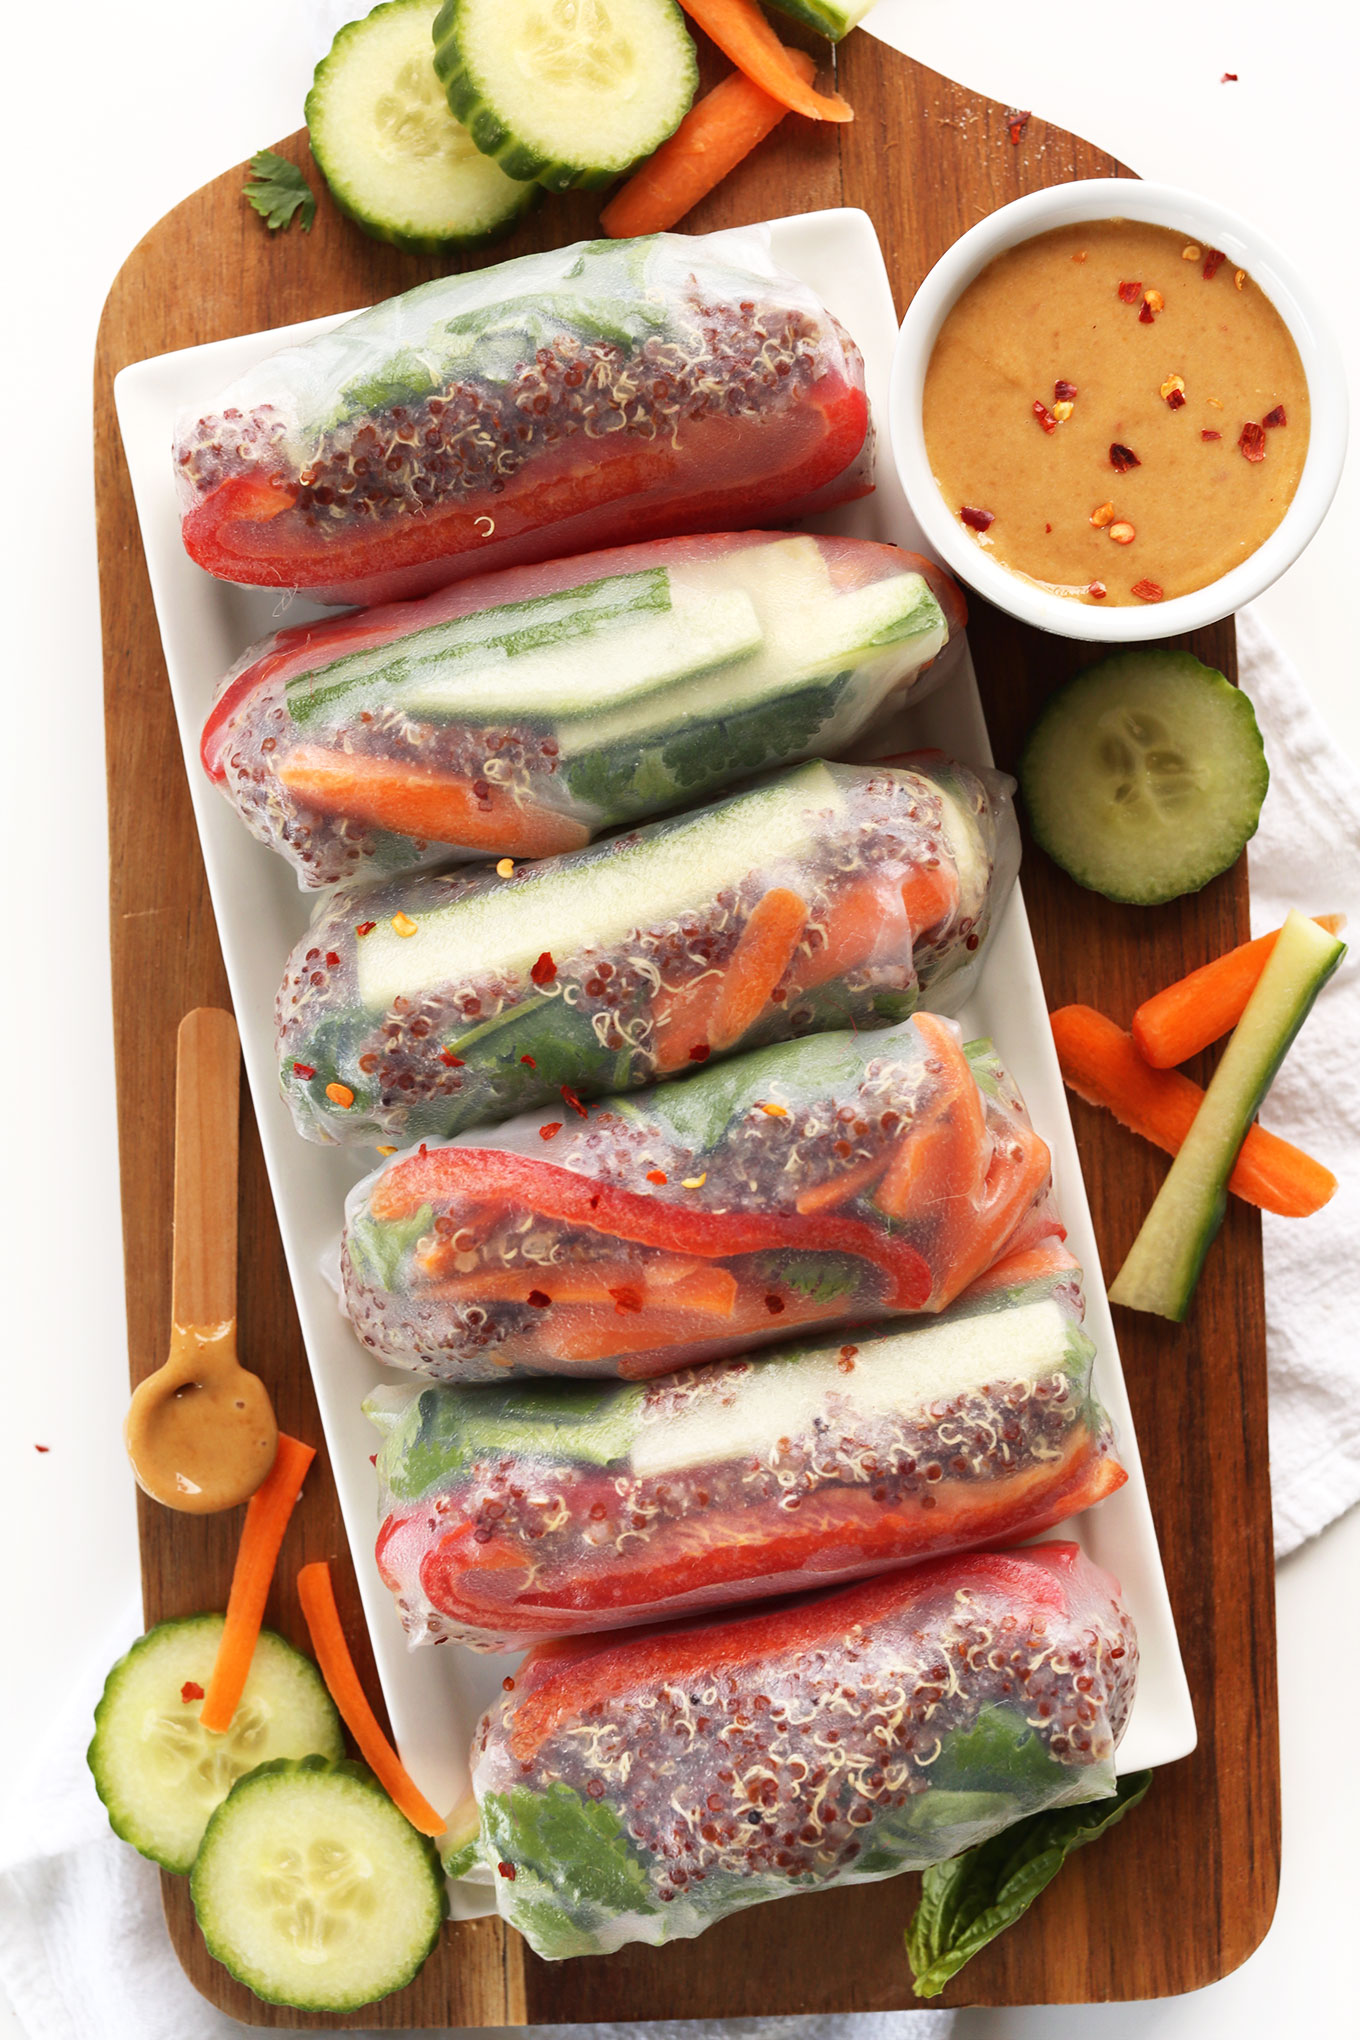 30-MINUTE Quinoa Spring Rolls! So fresh, filling and flavorful with CASHEW Dipping Sauce! #vegan #glutenfree #peanutfree